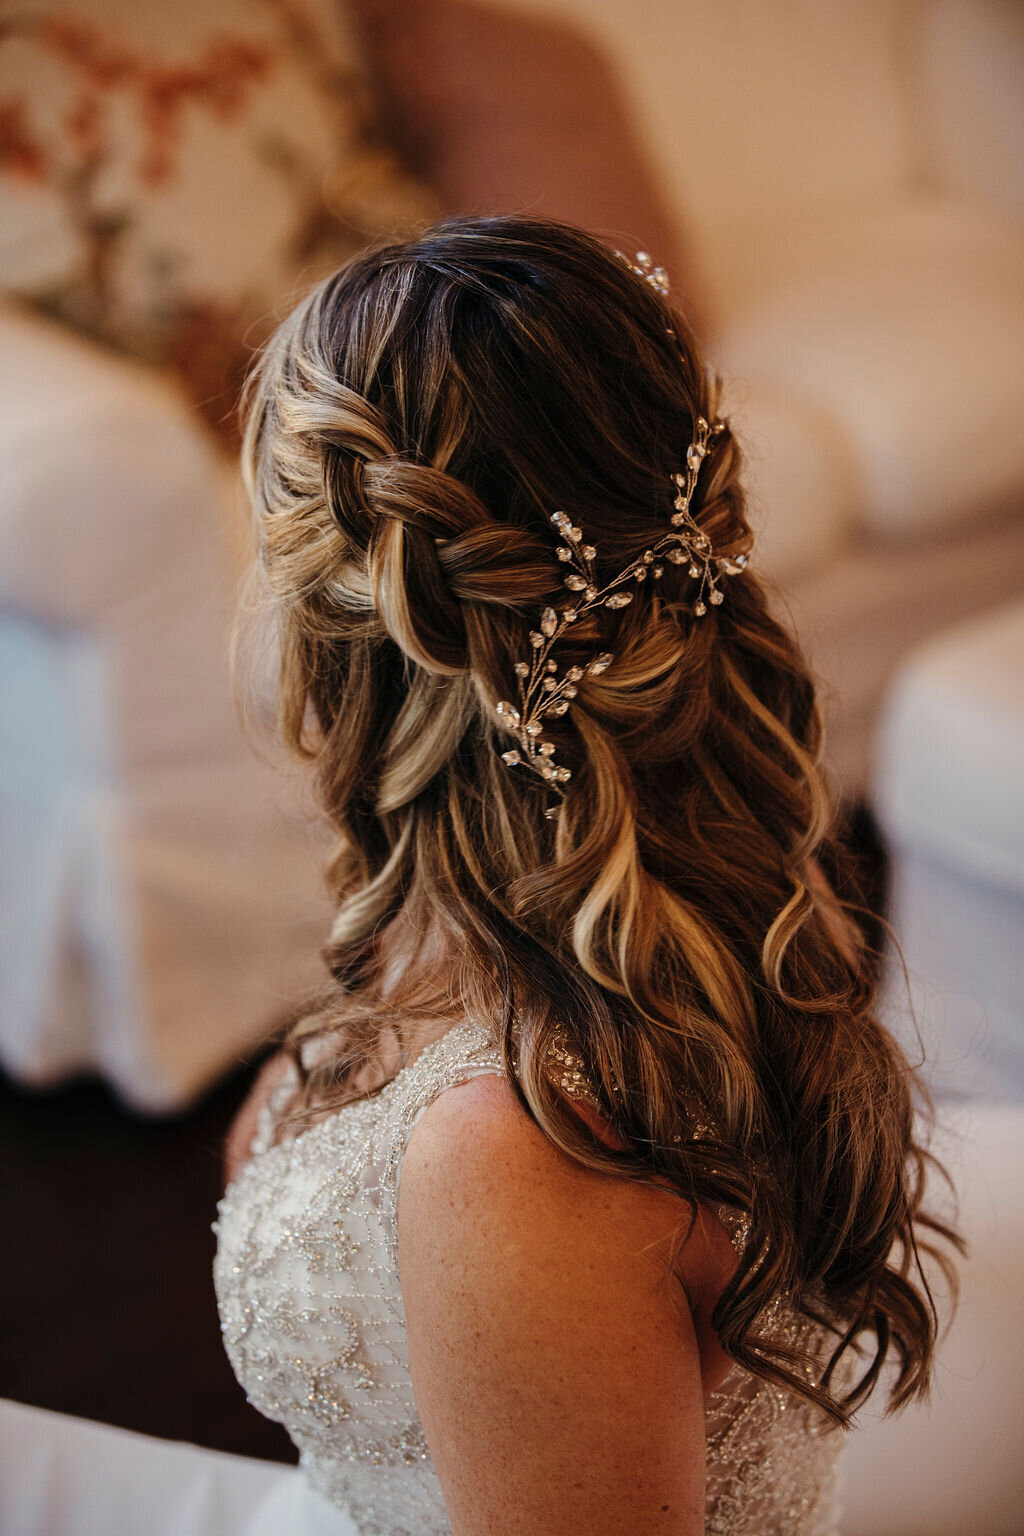 Bridal hairstyle with braids